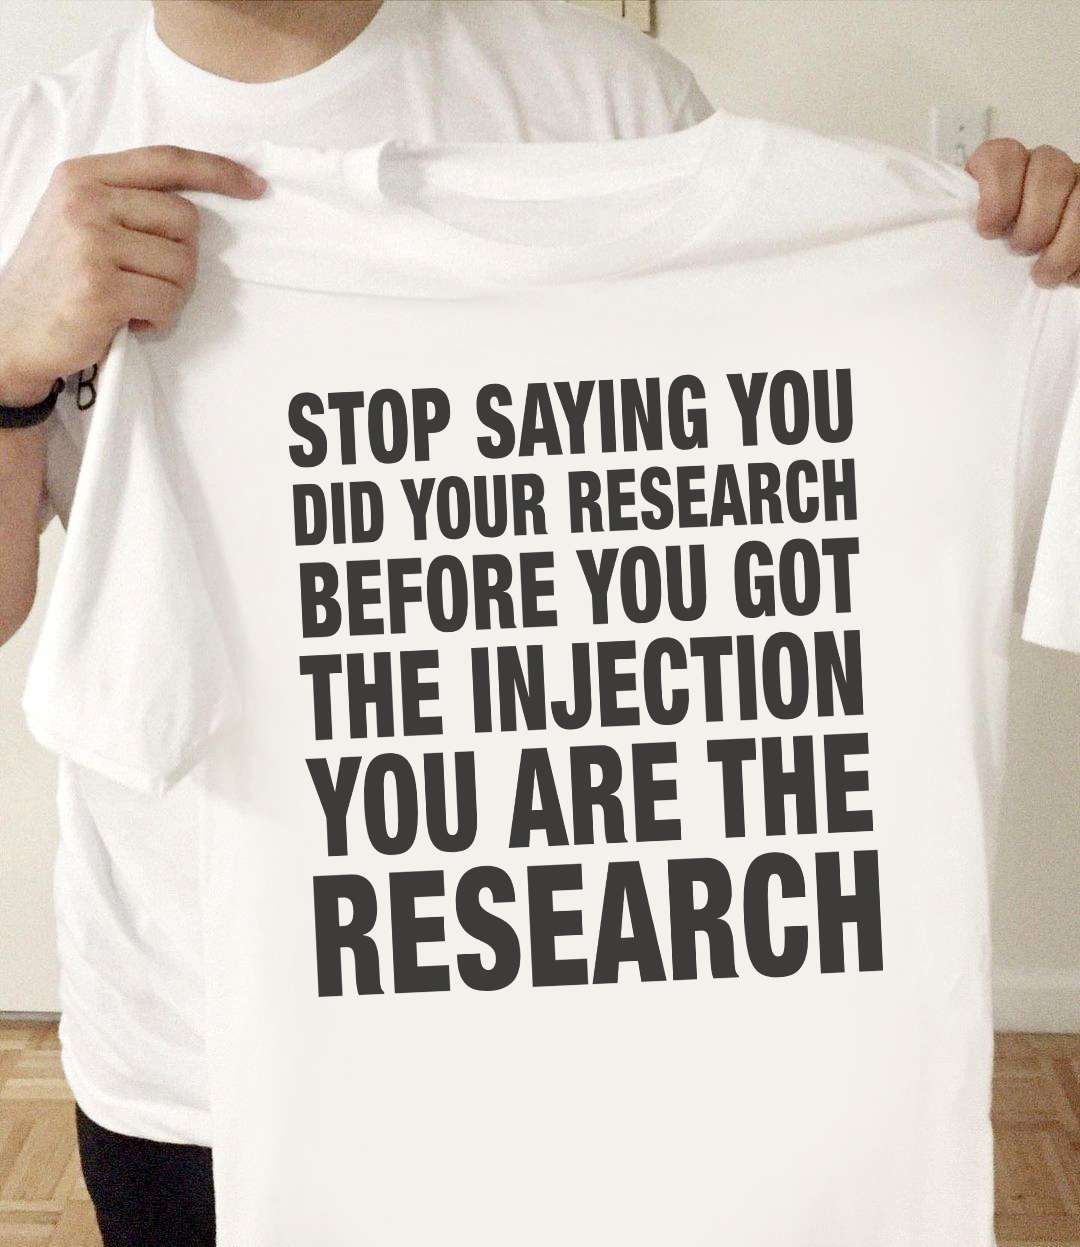 Stop saying you did your research before you got the injection you are the research